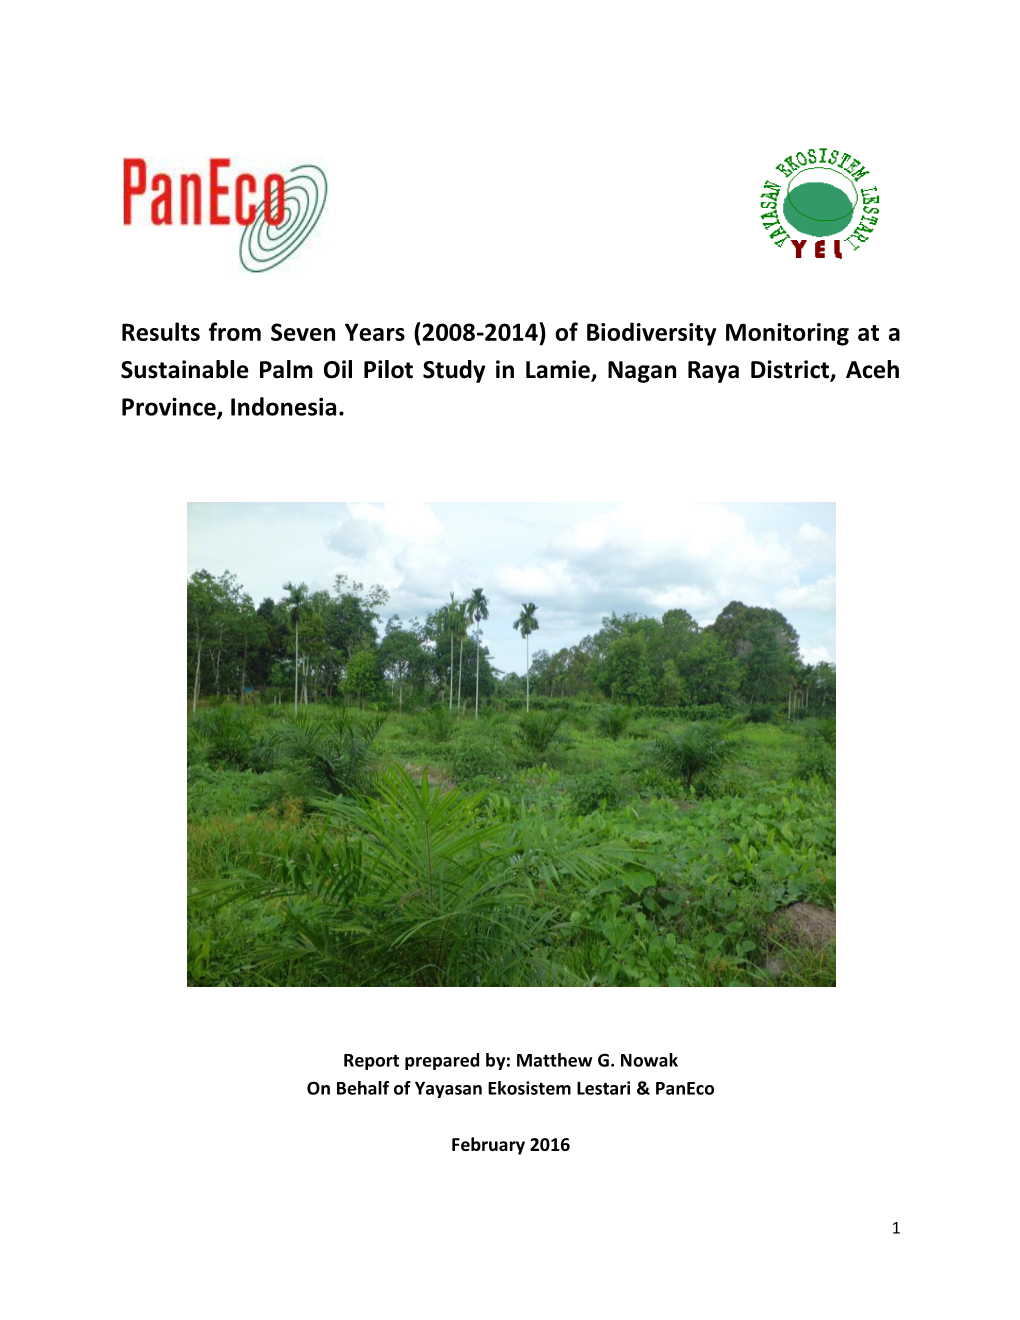 (2008-2014) of Biodiversity Monitoring at a Sustainable Palm Oil Pilot Study in Lamie, Nagan Raya District, Aceh Province, Indonesia